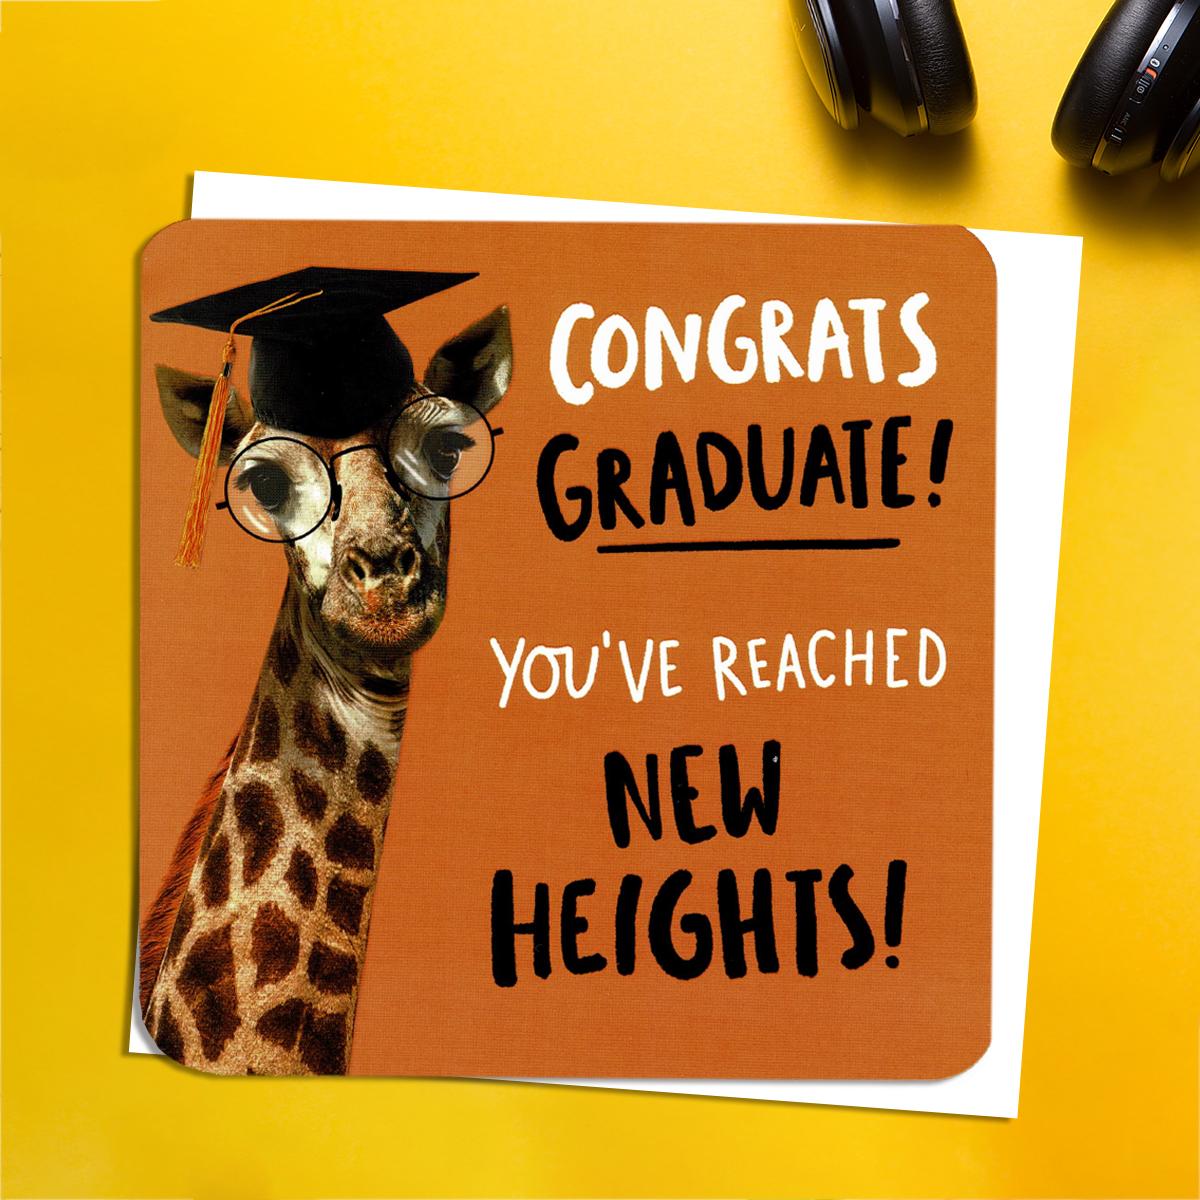 Congrats Graduate! You've Reached New Heights! Card Front Image